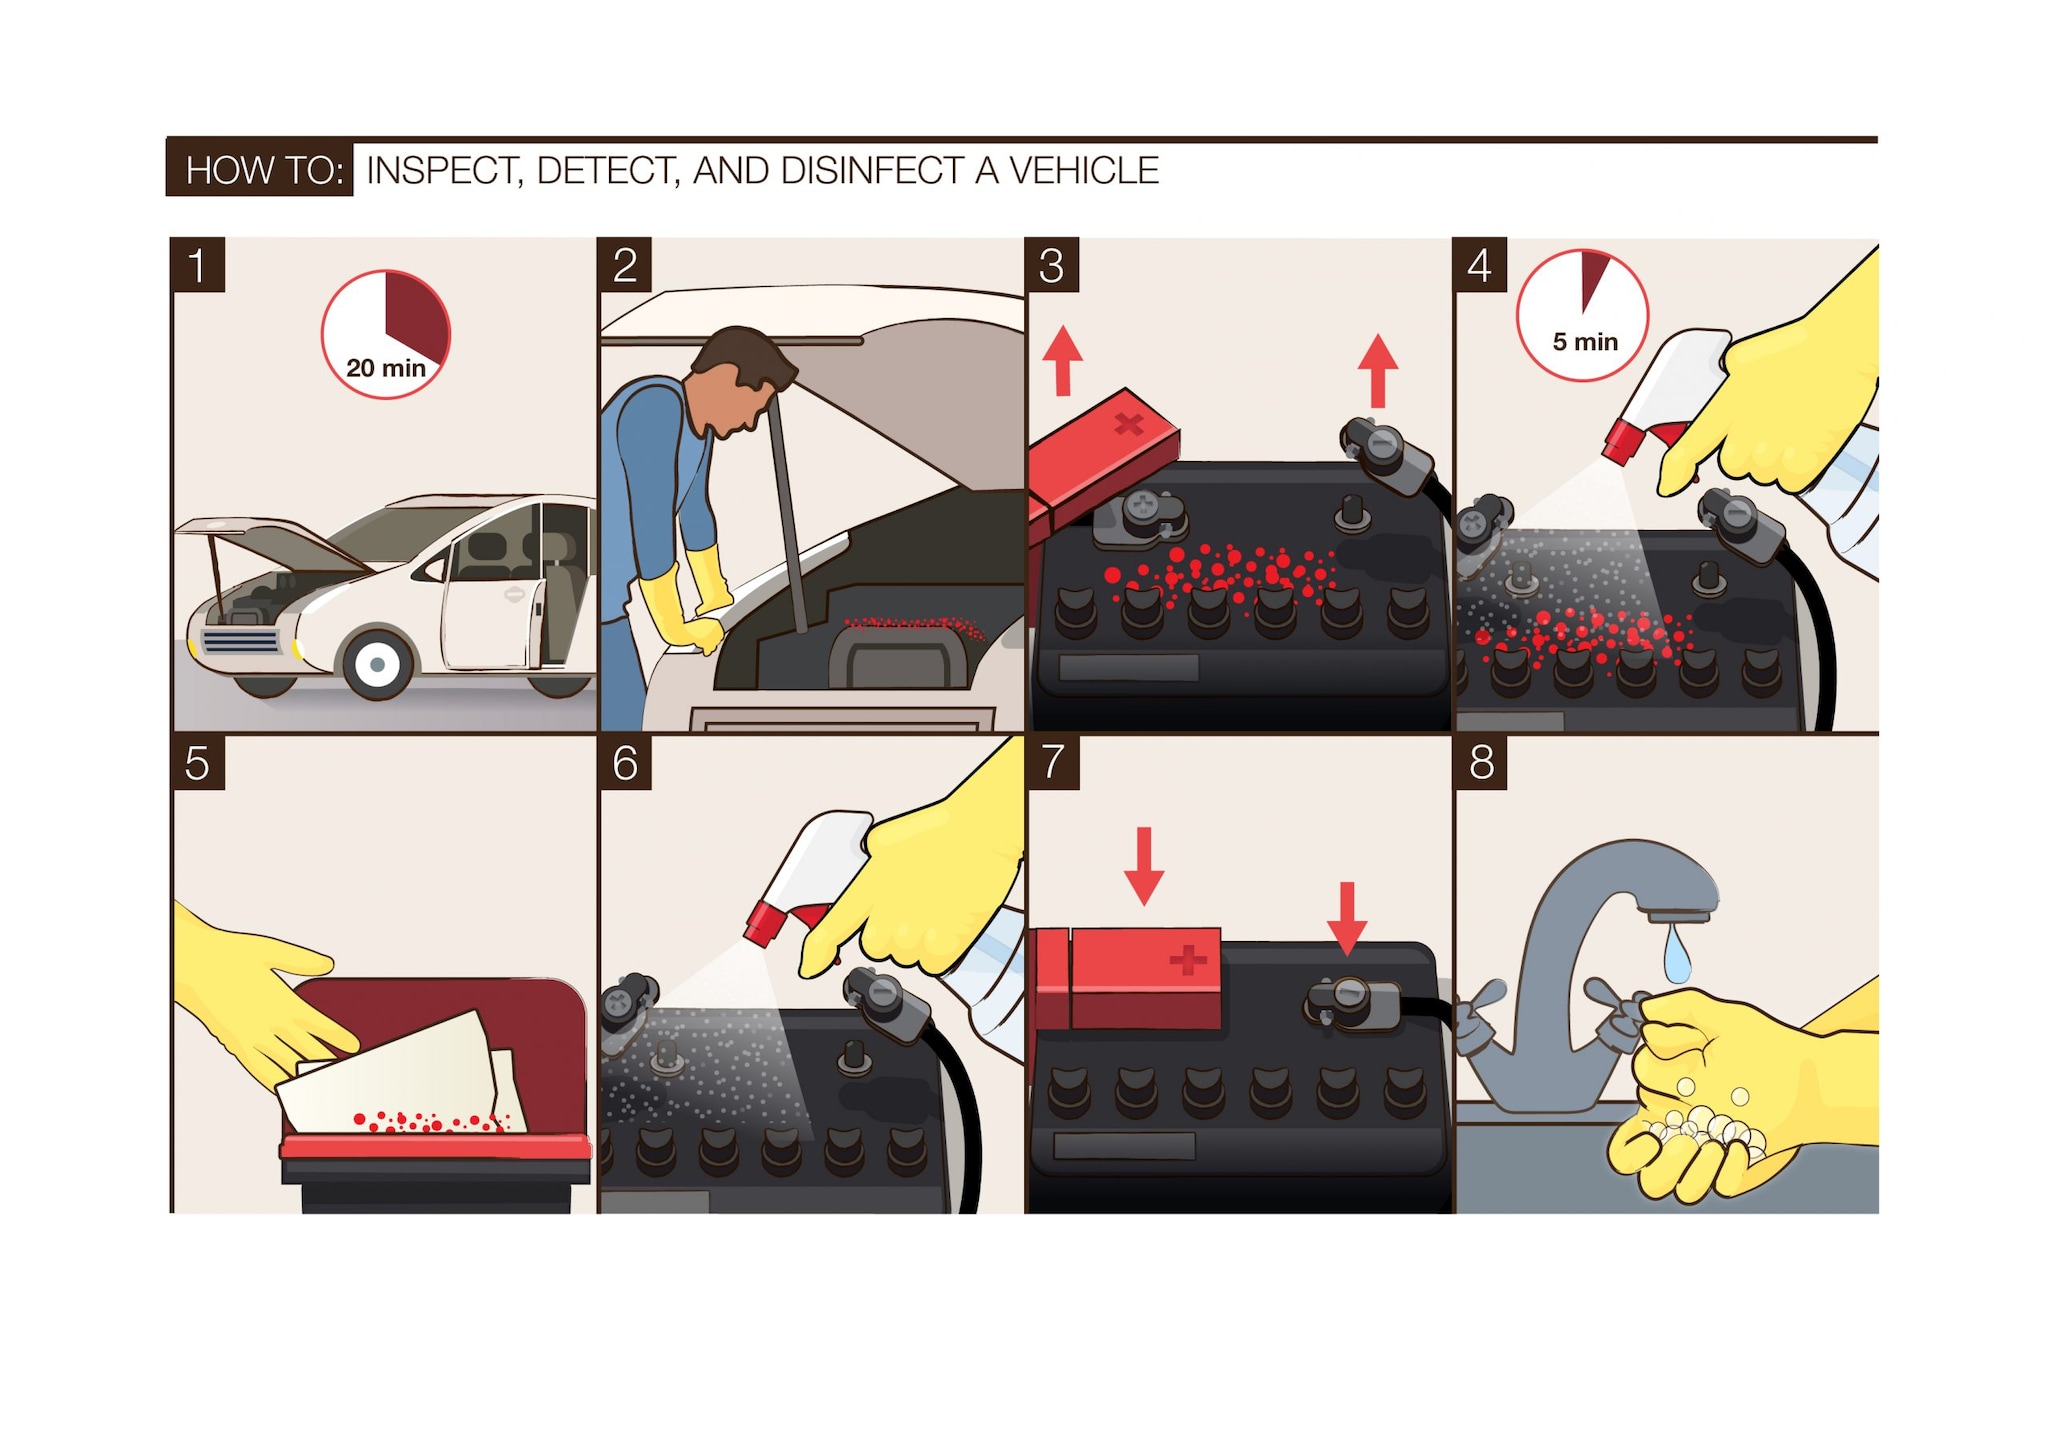 An illustration showing how to inspect, detect, and disinfect a vehicle